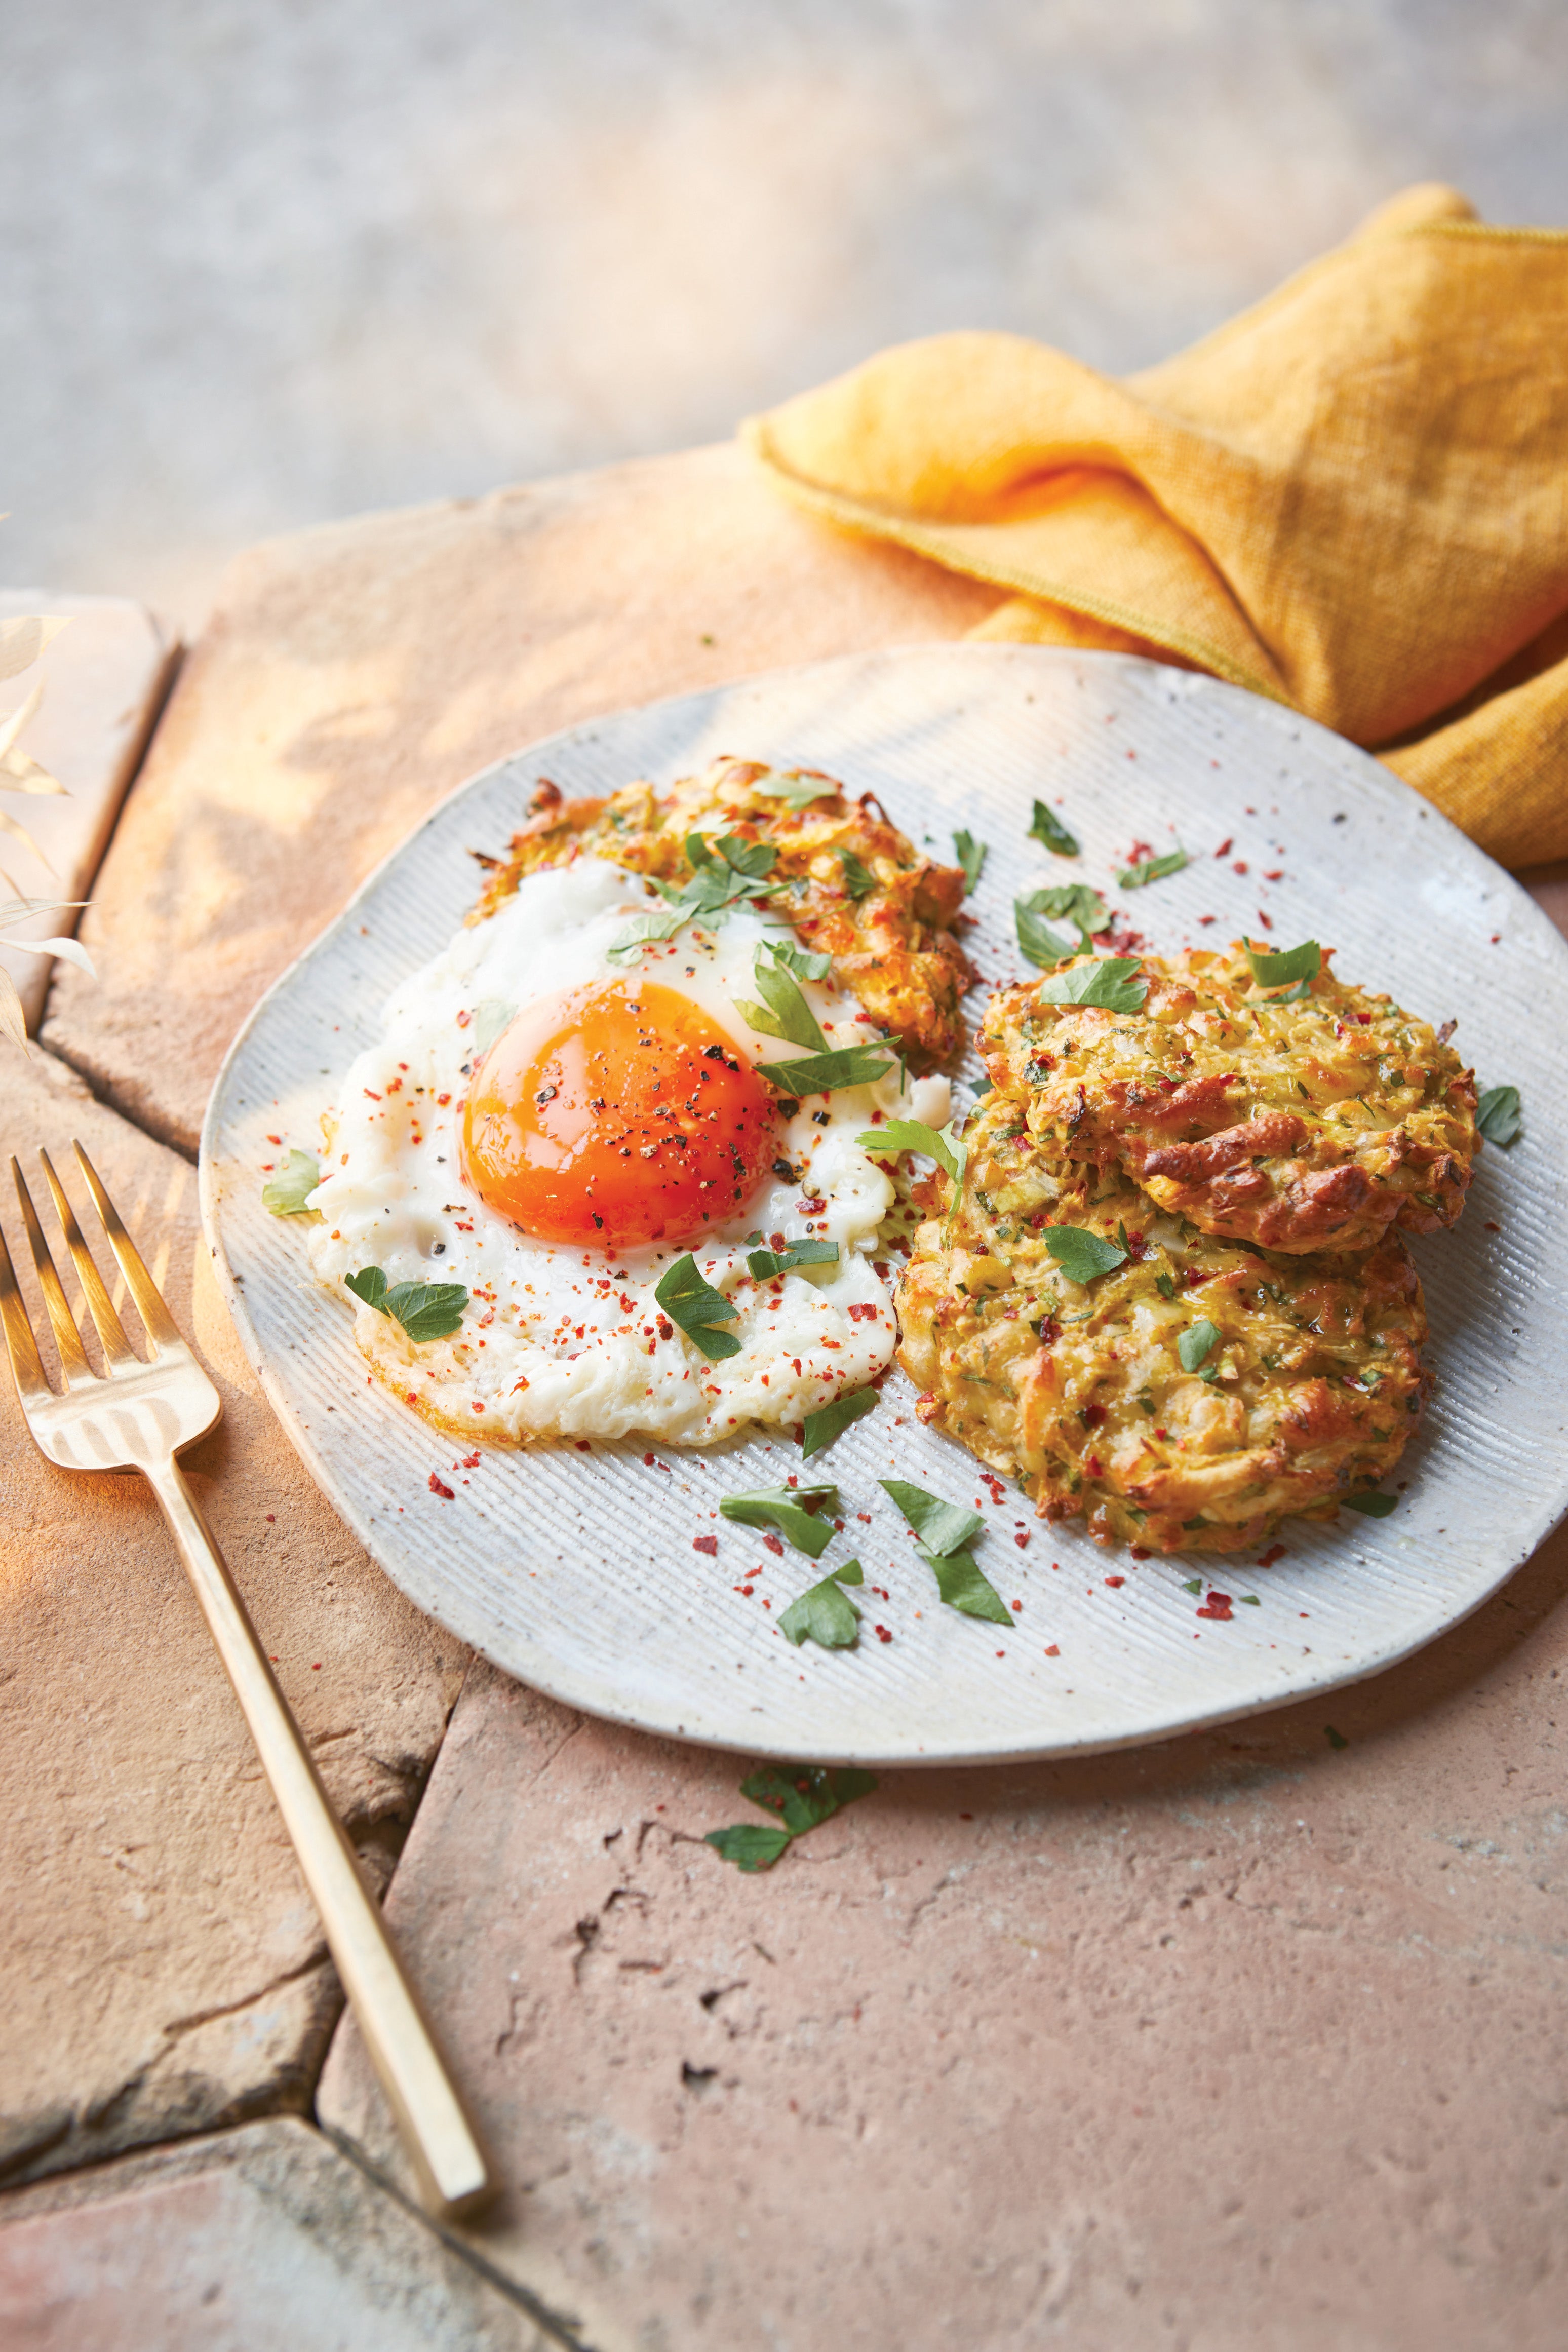 The spicy root patties from The Diabetes Weight-Loss Plan by Katie Caldesi